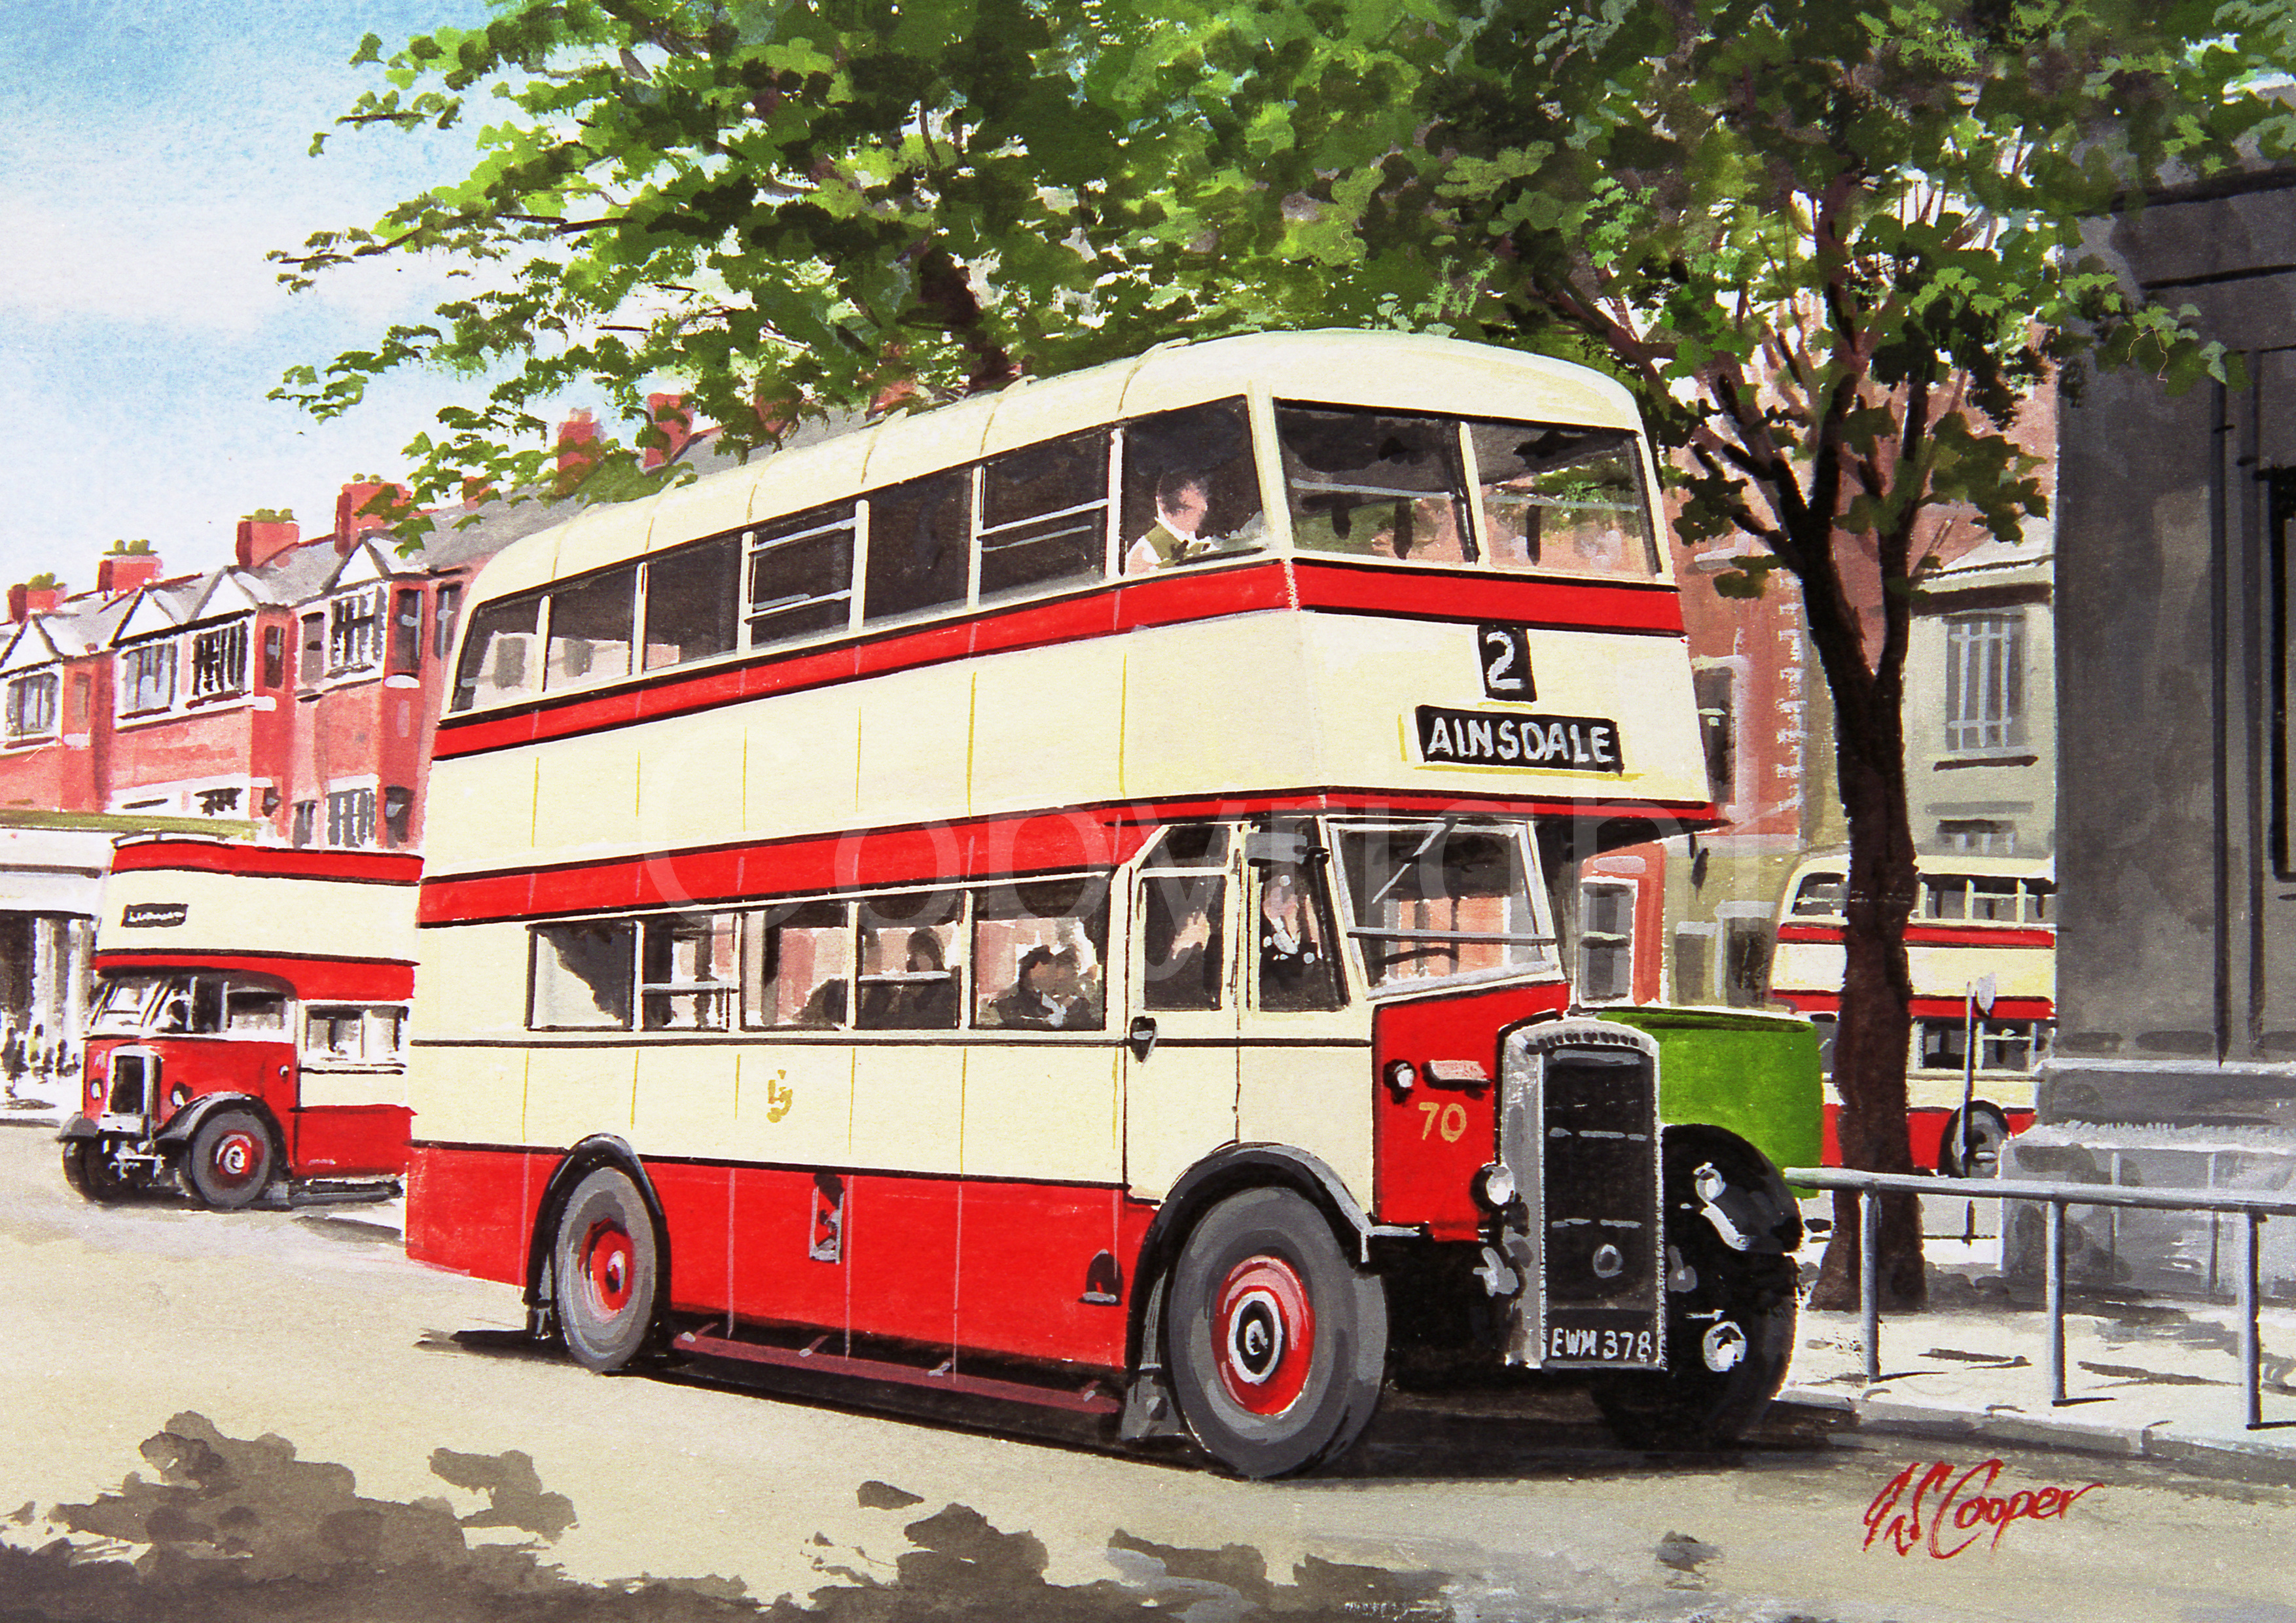 Southport Lord Street No 2 Bus To Ainsdale Extra Large Metal Wall Art.